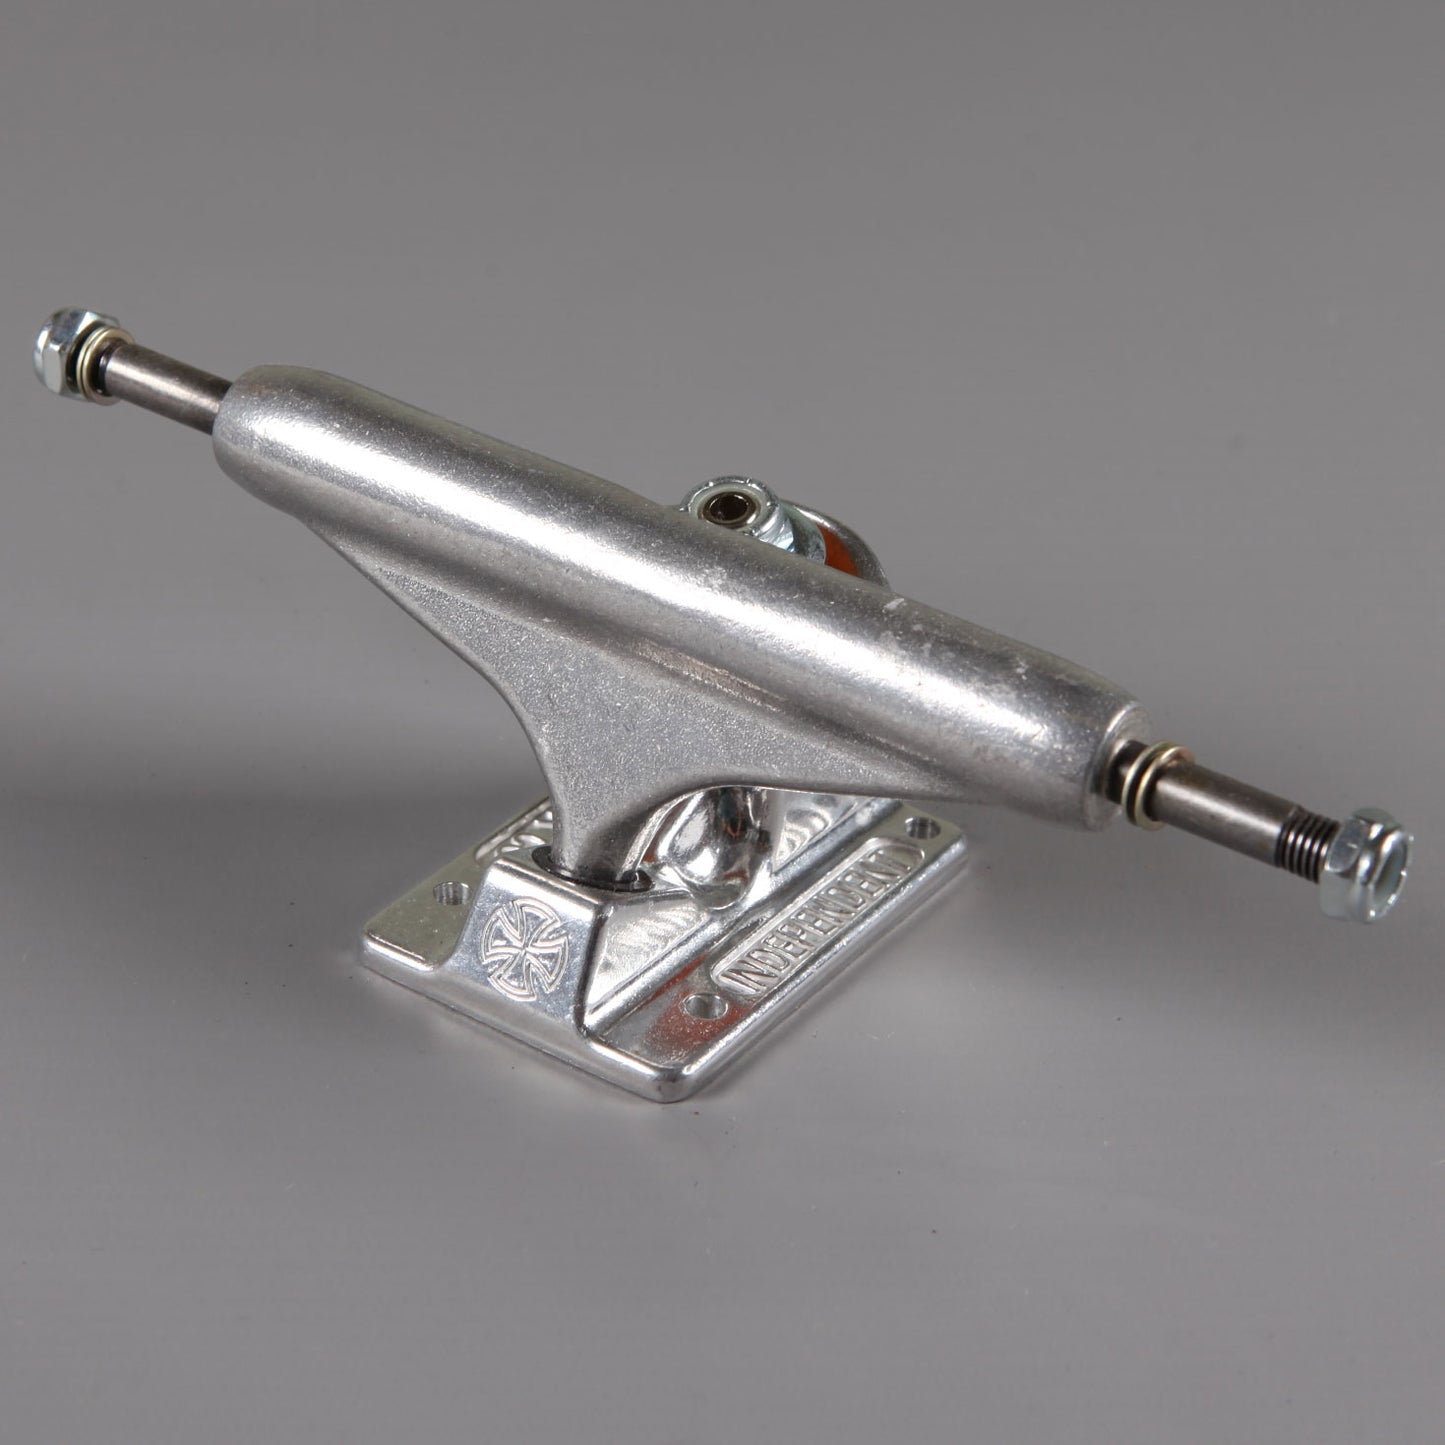 Independent 'Forged Hollow' Stage 11 139 Trucks (Silver) - CSC Skate Shop UK